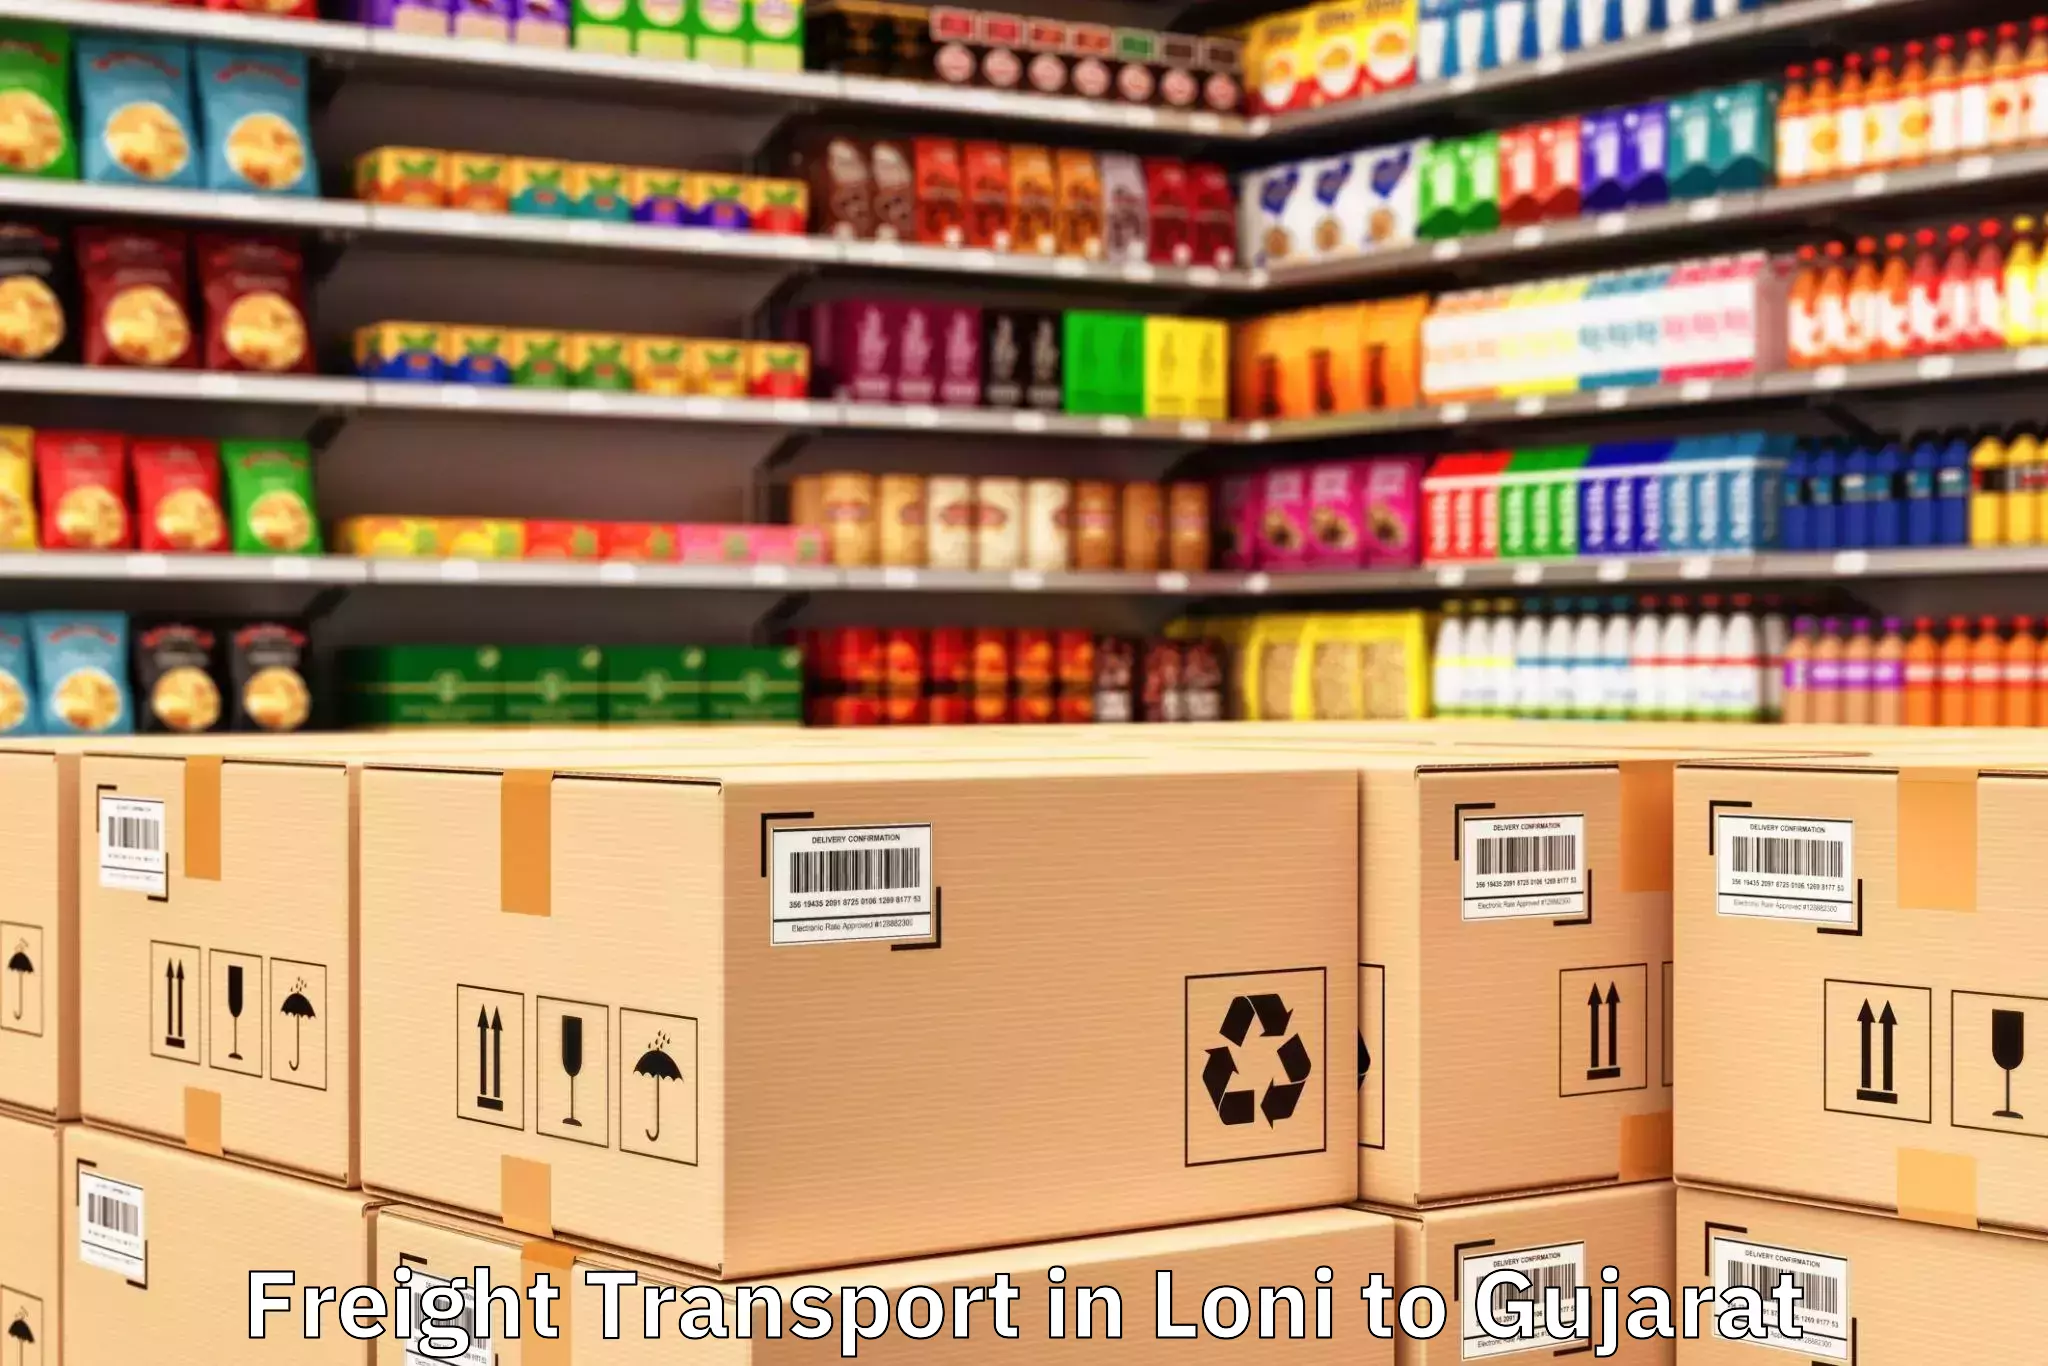 Discover Loni to Surat Airport Stv Freight Transport